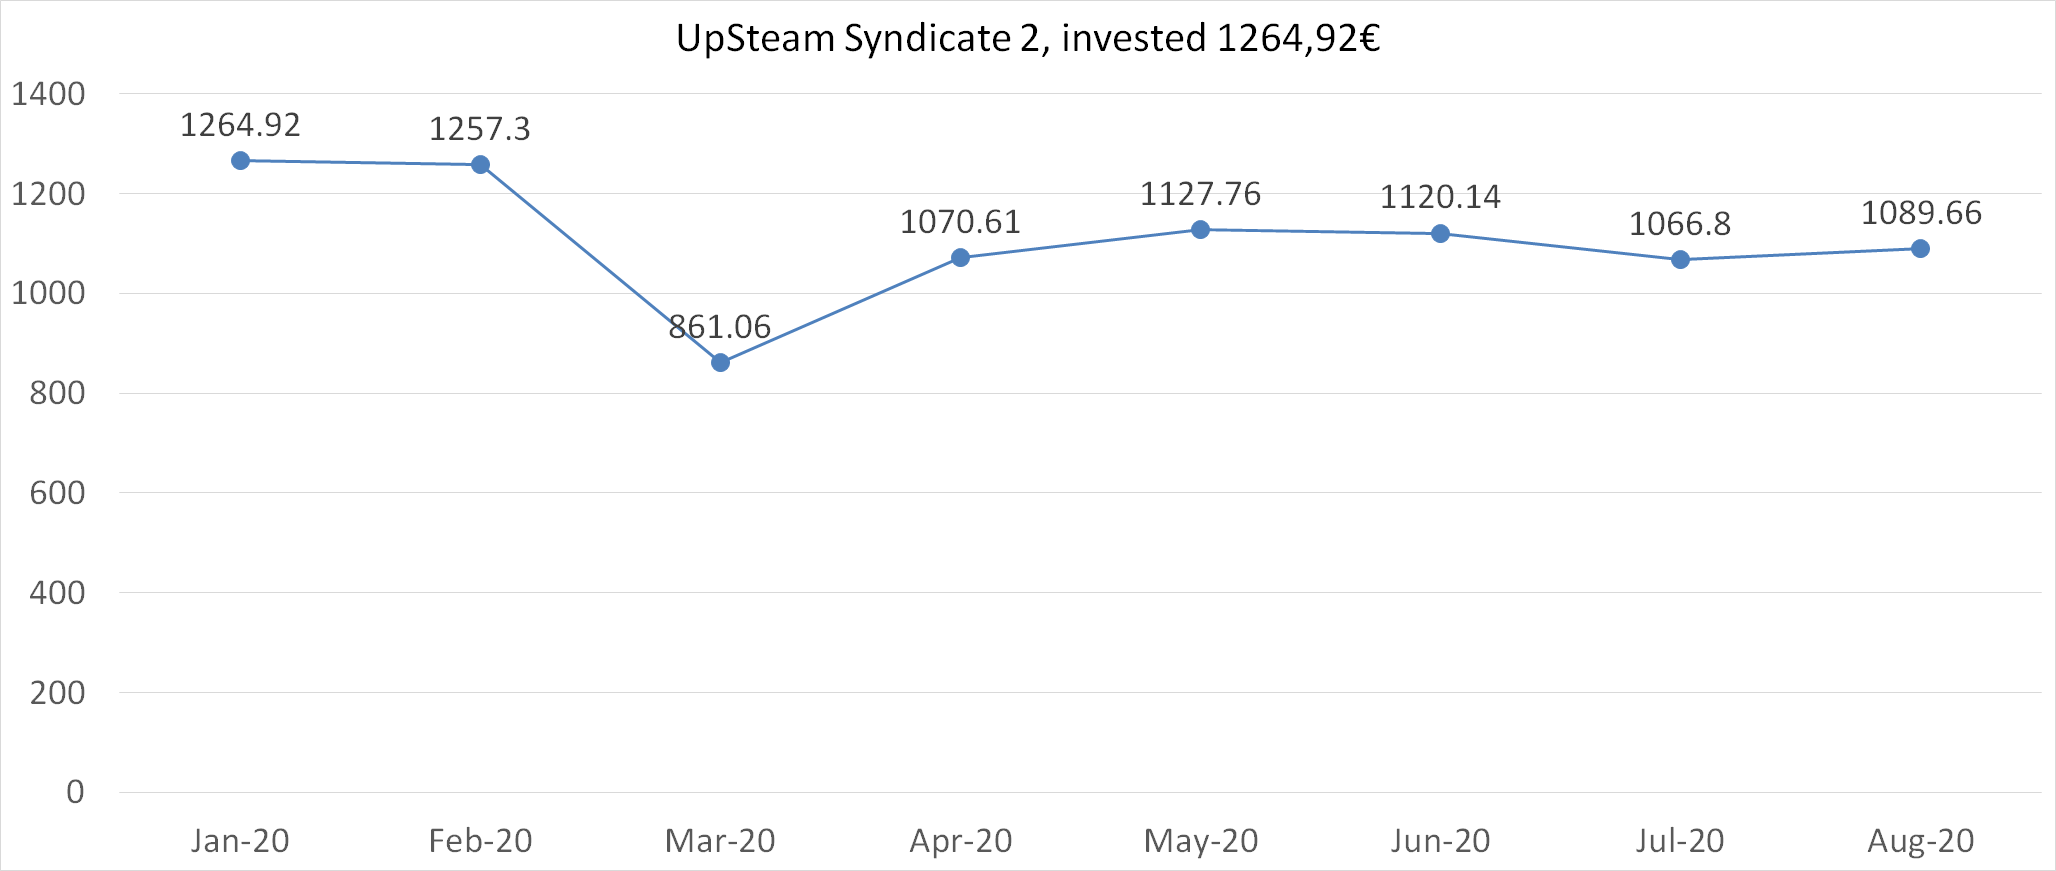 Upsteam 2 syndicate worth august 2020